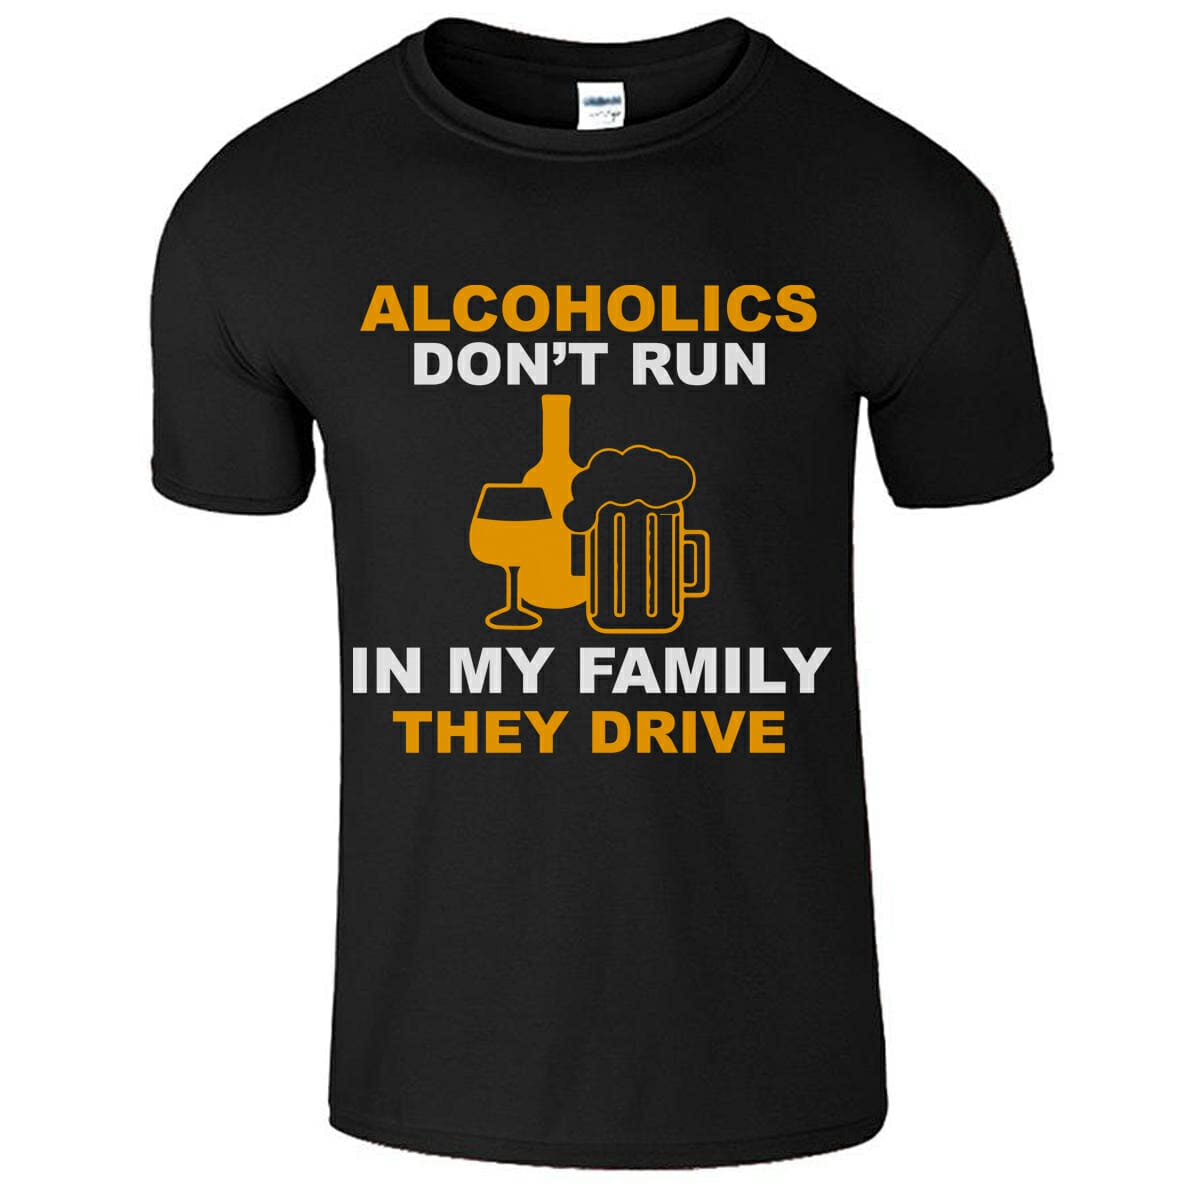 Alcoholic don’t run in my family they drive t-shirt design